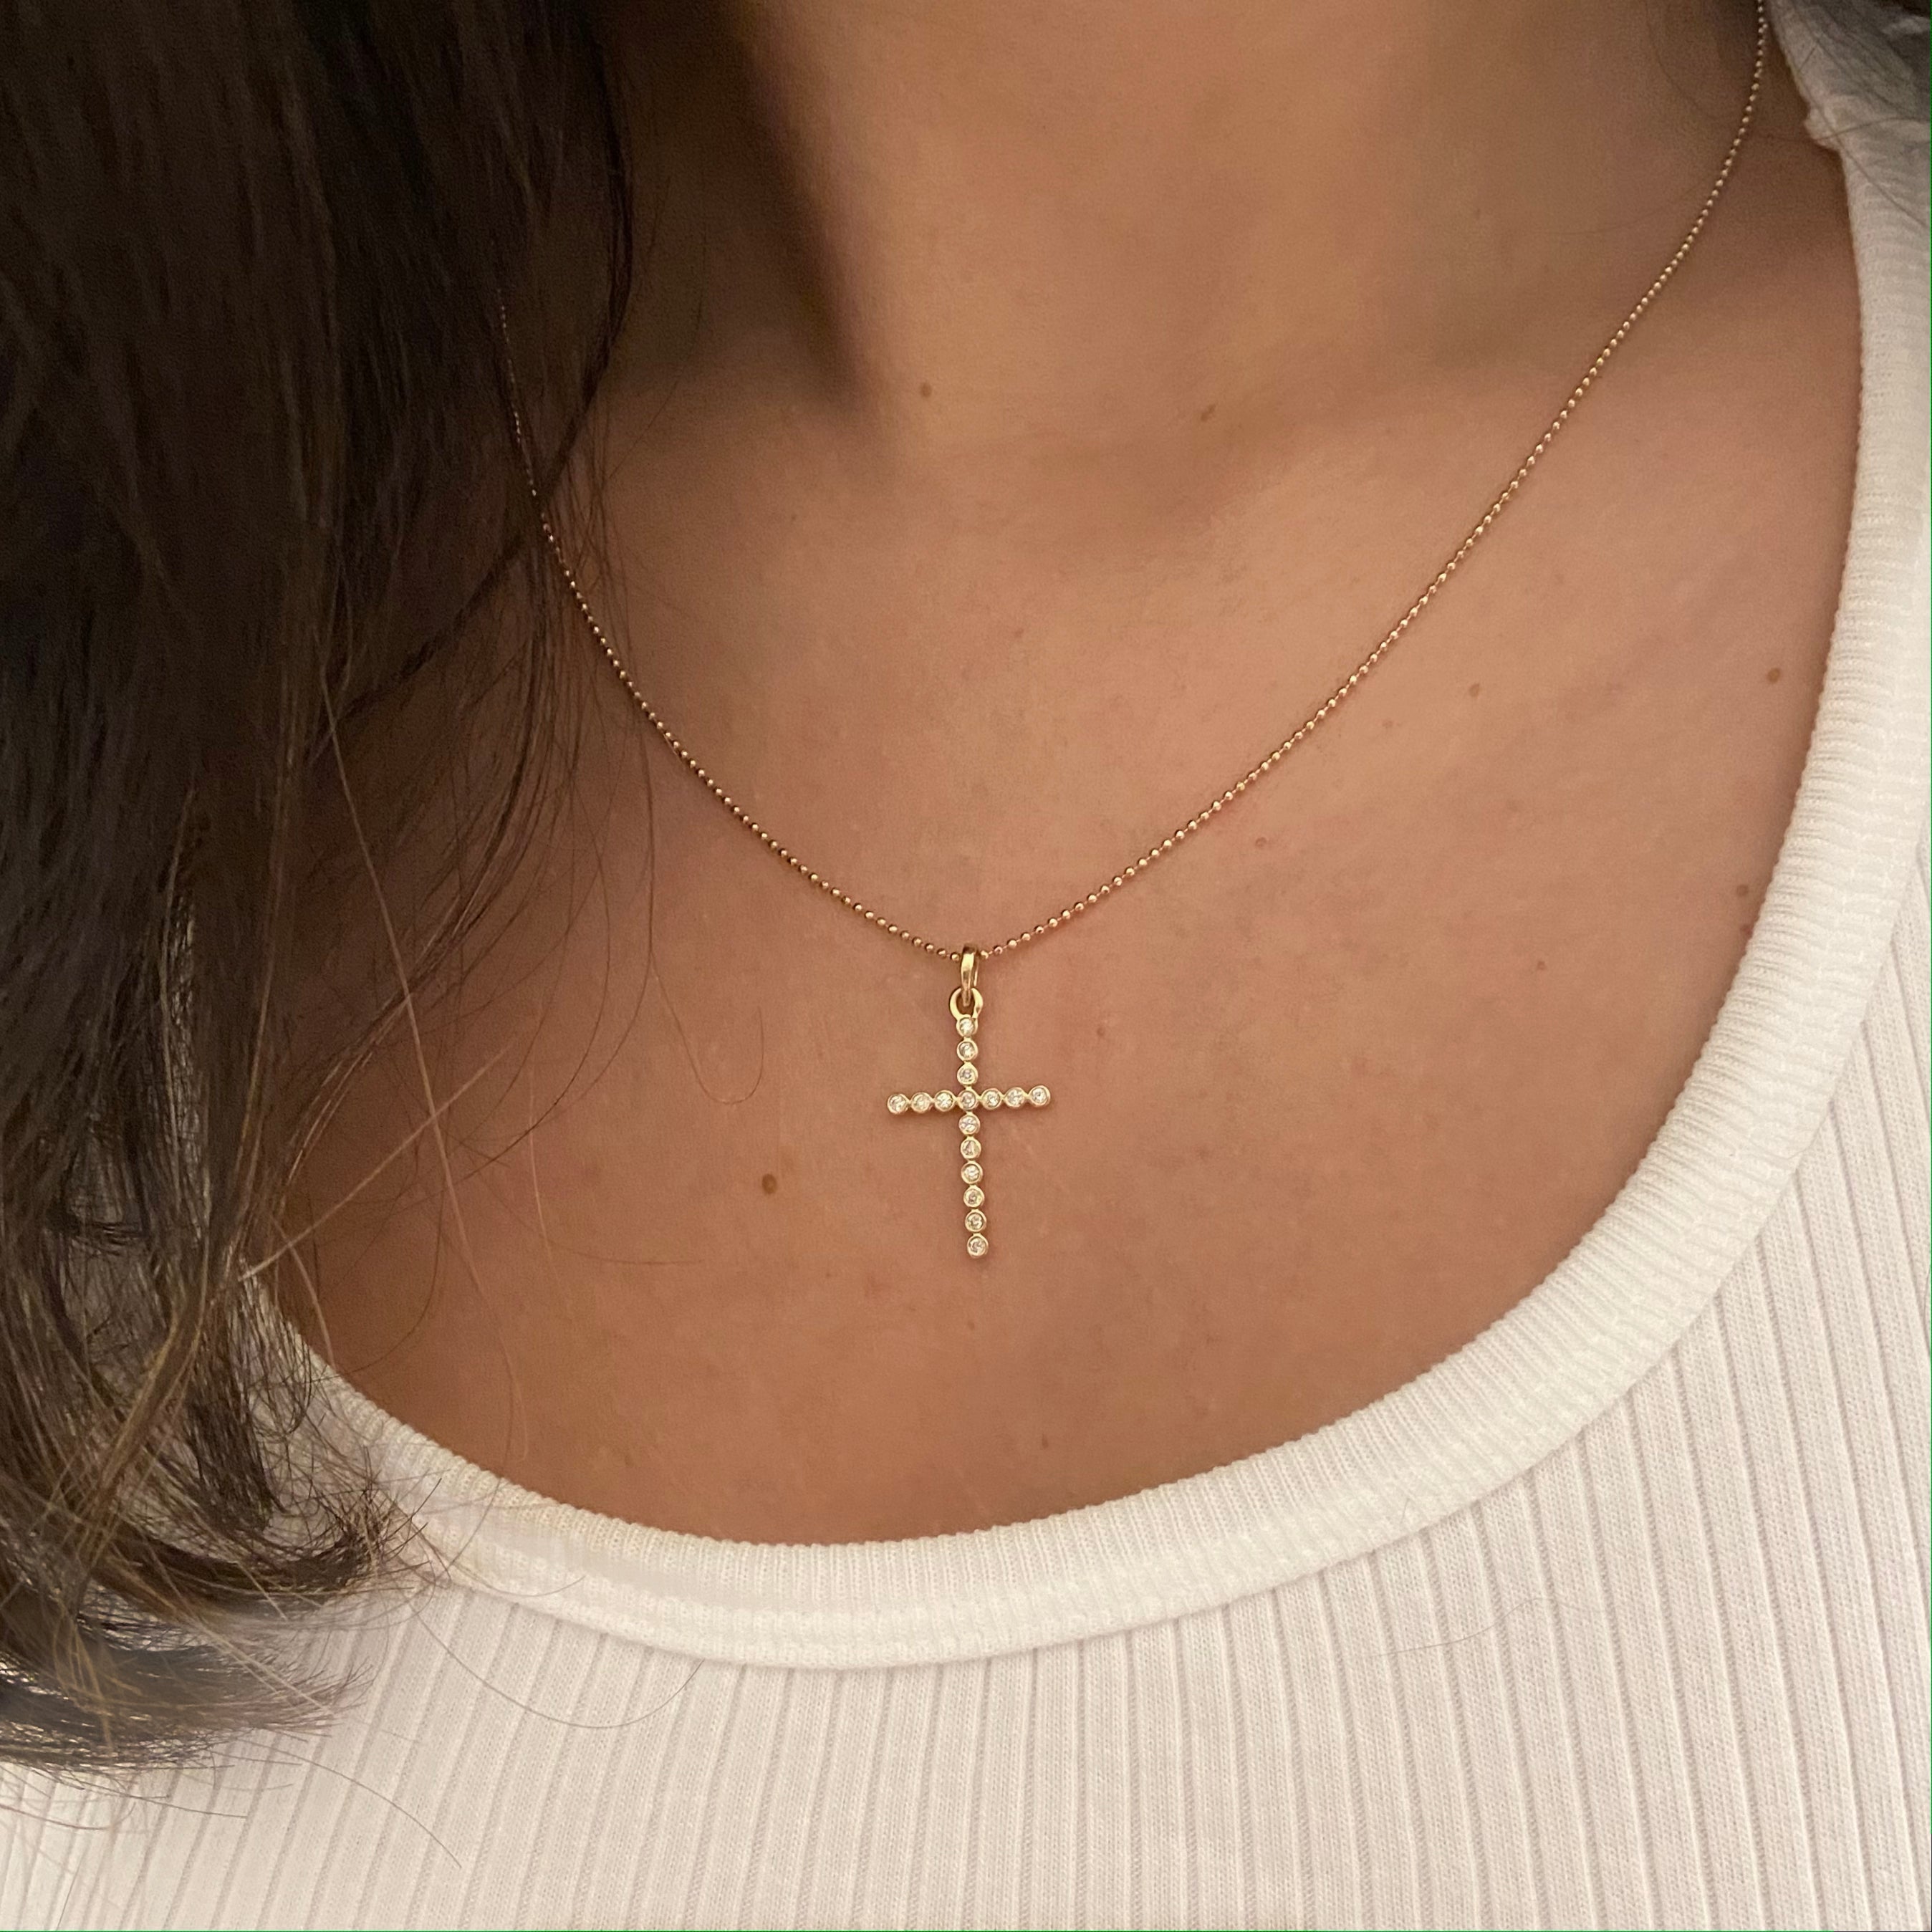 PELOVNY S925 Sterling Silver/Gold Plated Jesus Christ Crucifix Large Cross  Religious Pendant Necklace, Jesus Cross Jewelry, Antique Finish Cross  Necklaces For Men-Whistle Shape | Amazon.com